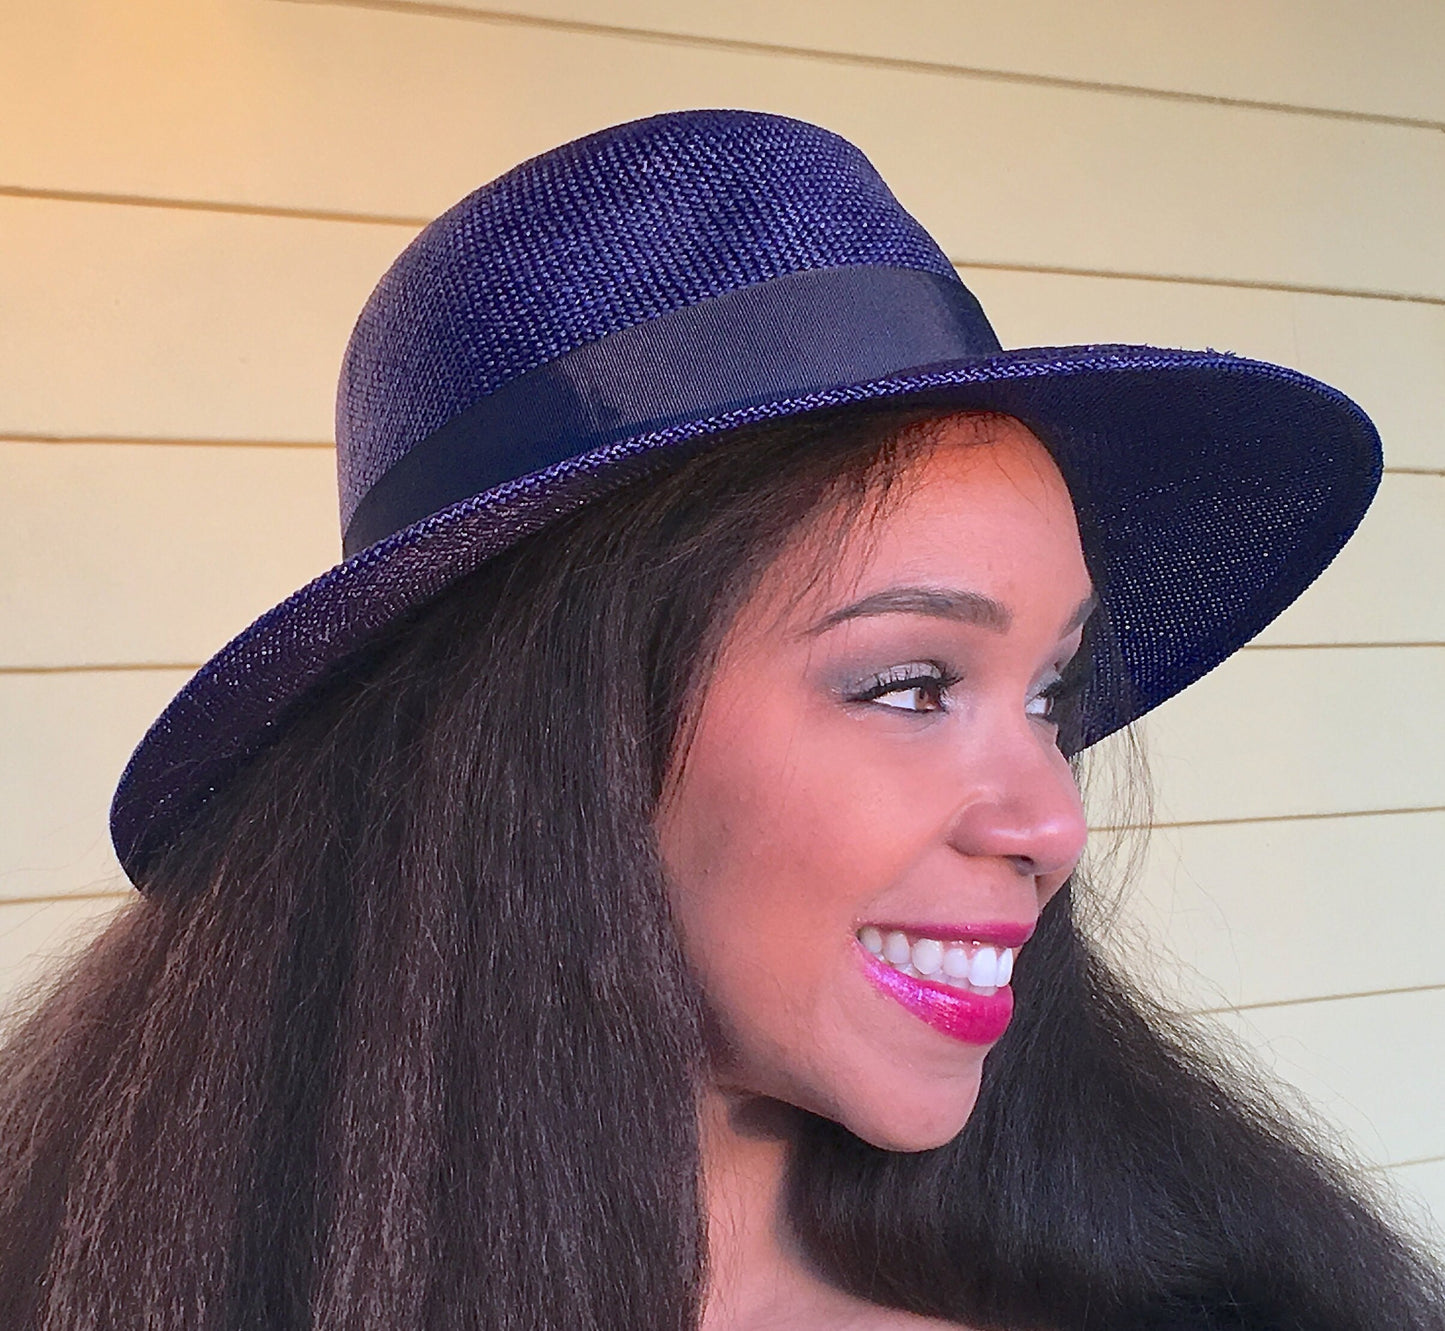 Hand Dyed Royal Blue Straw Fedora-Summer Hat-Belmont race track-Preakness-Wedding hat-Womans Hat-Everyday Straw Hat-Classic Straw Fedora Hat